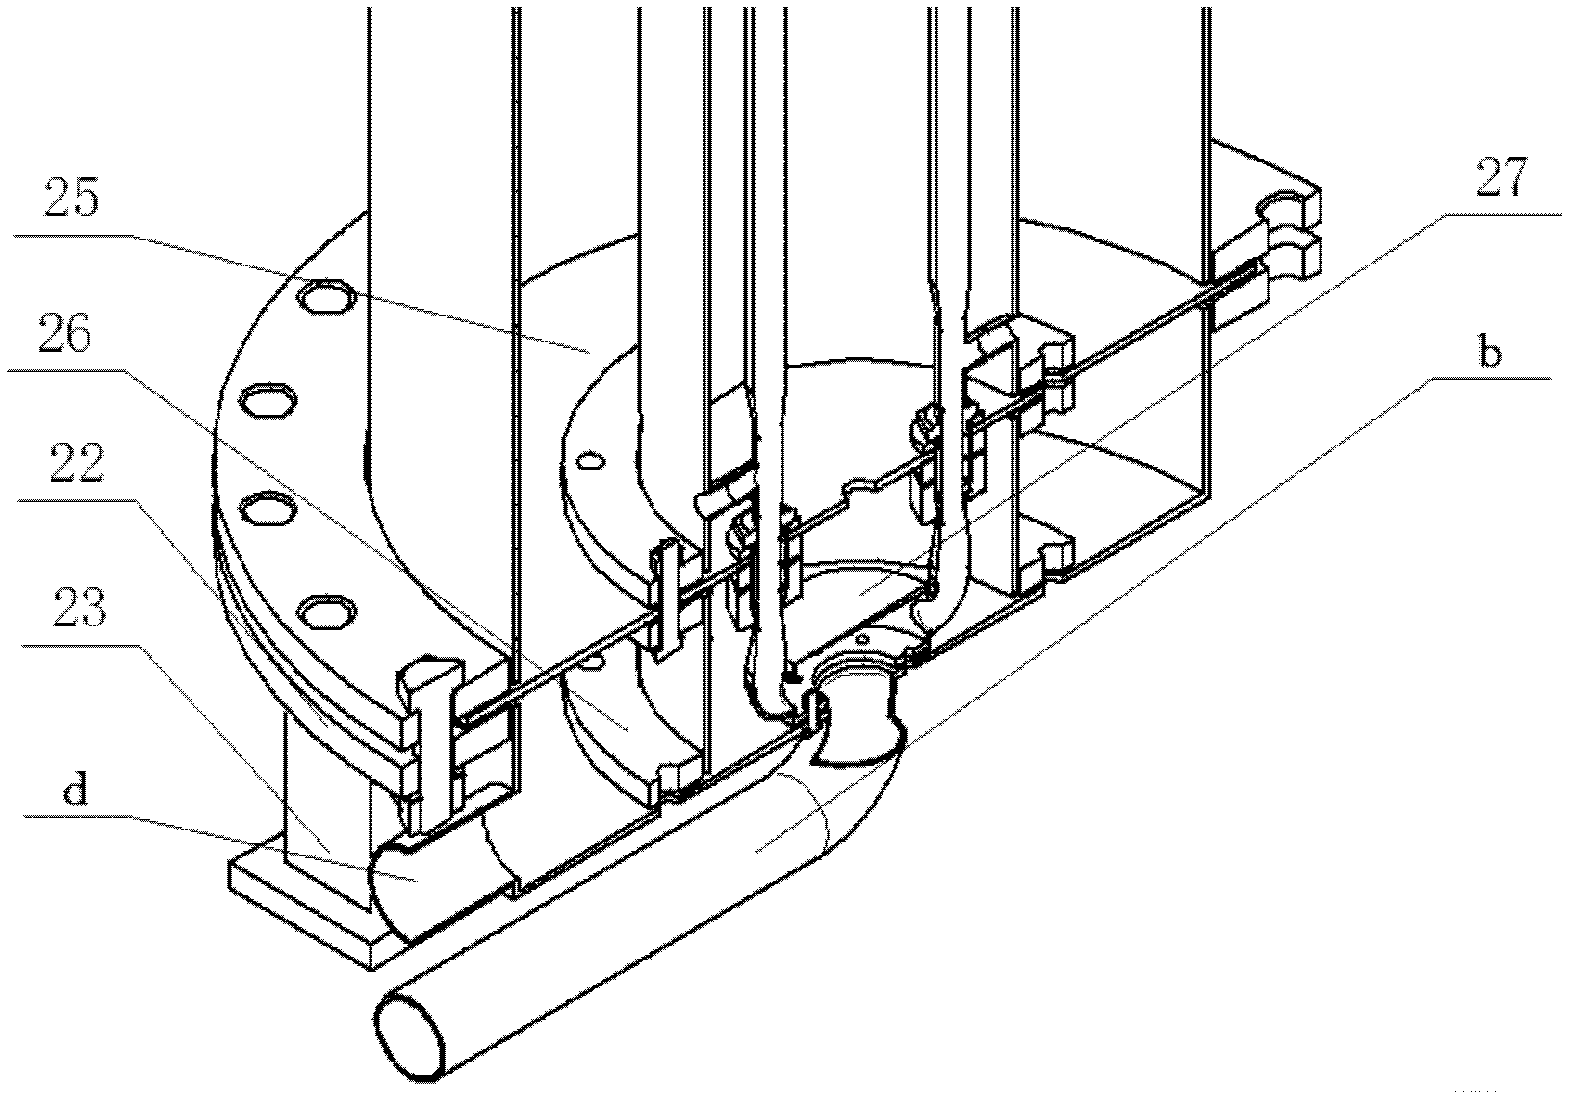 Ring-shaped fluidized bed reactor